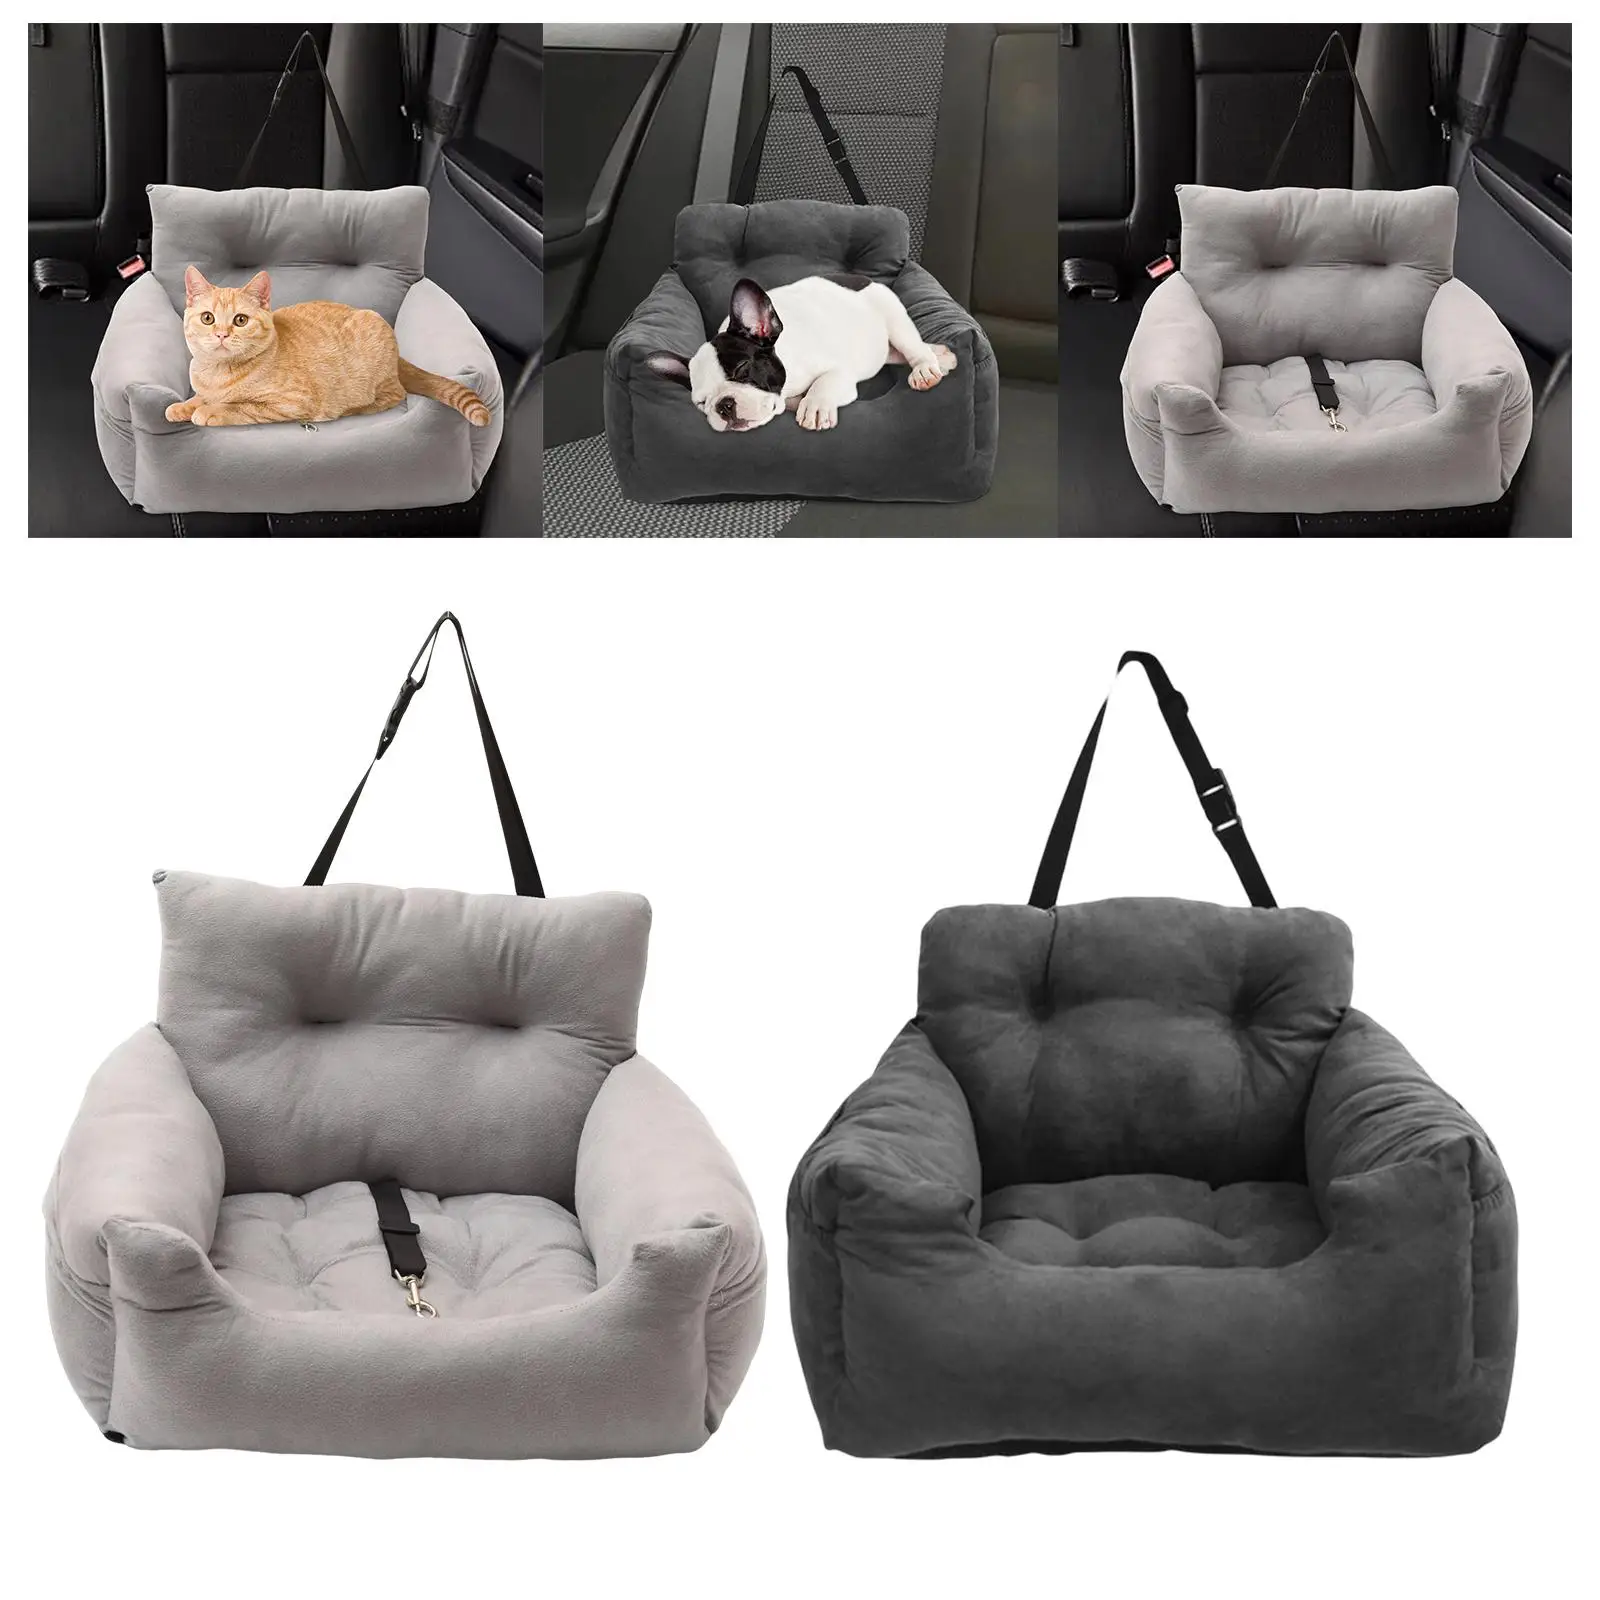 Portable Dog Bed Seat, Lightweight Sofa Outdoor Seat for Puppy Accessories